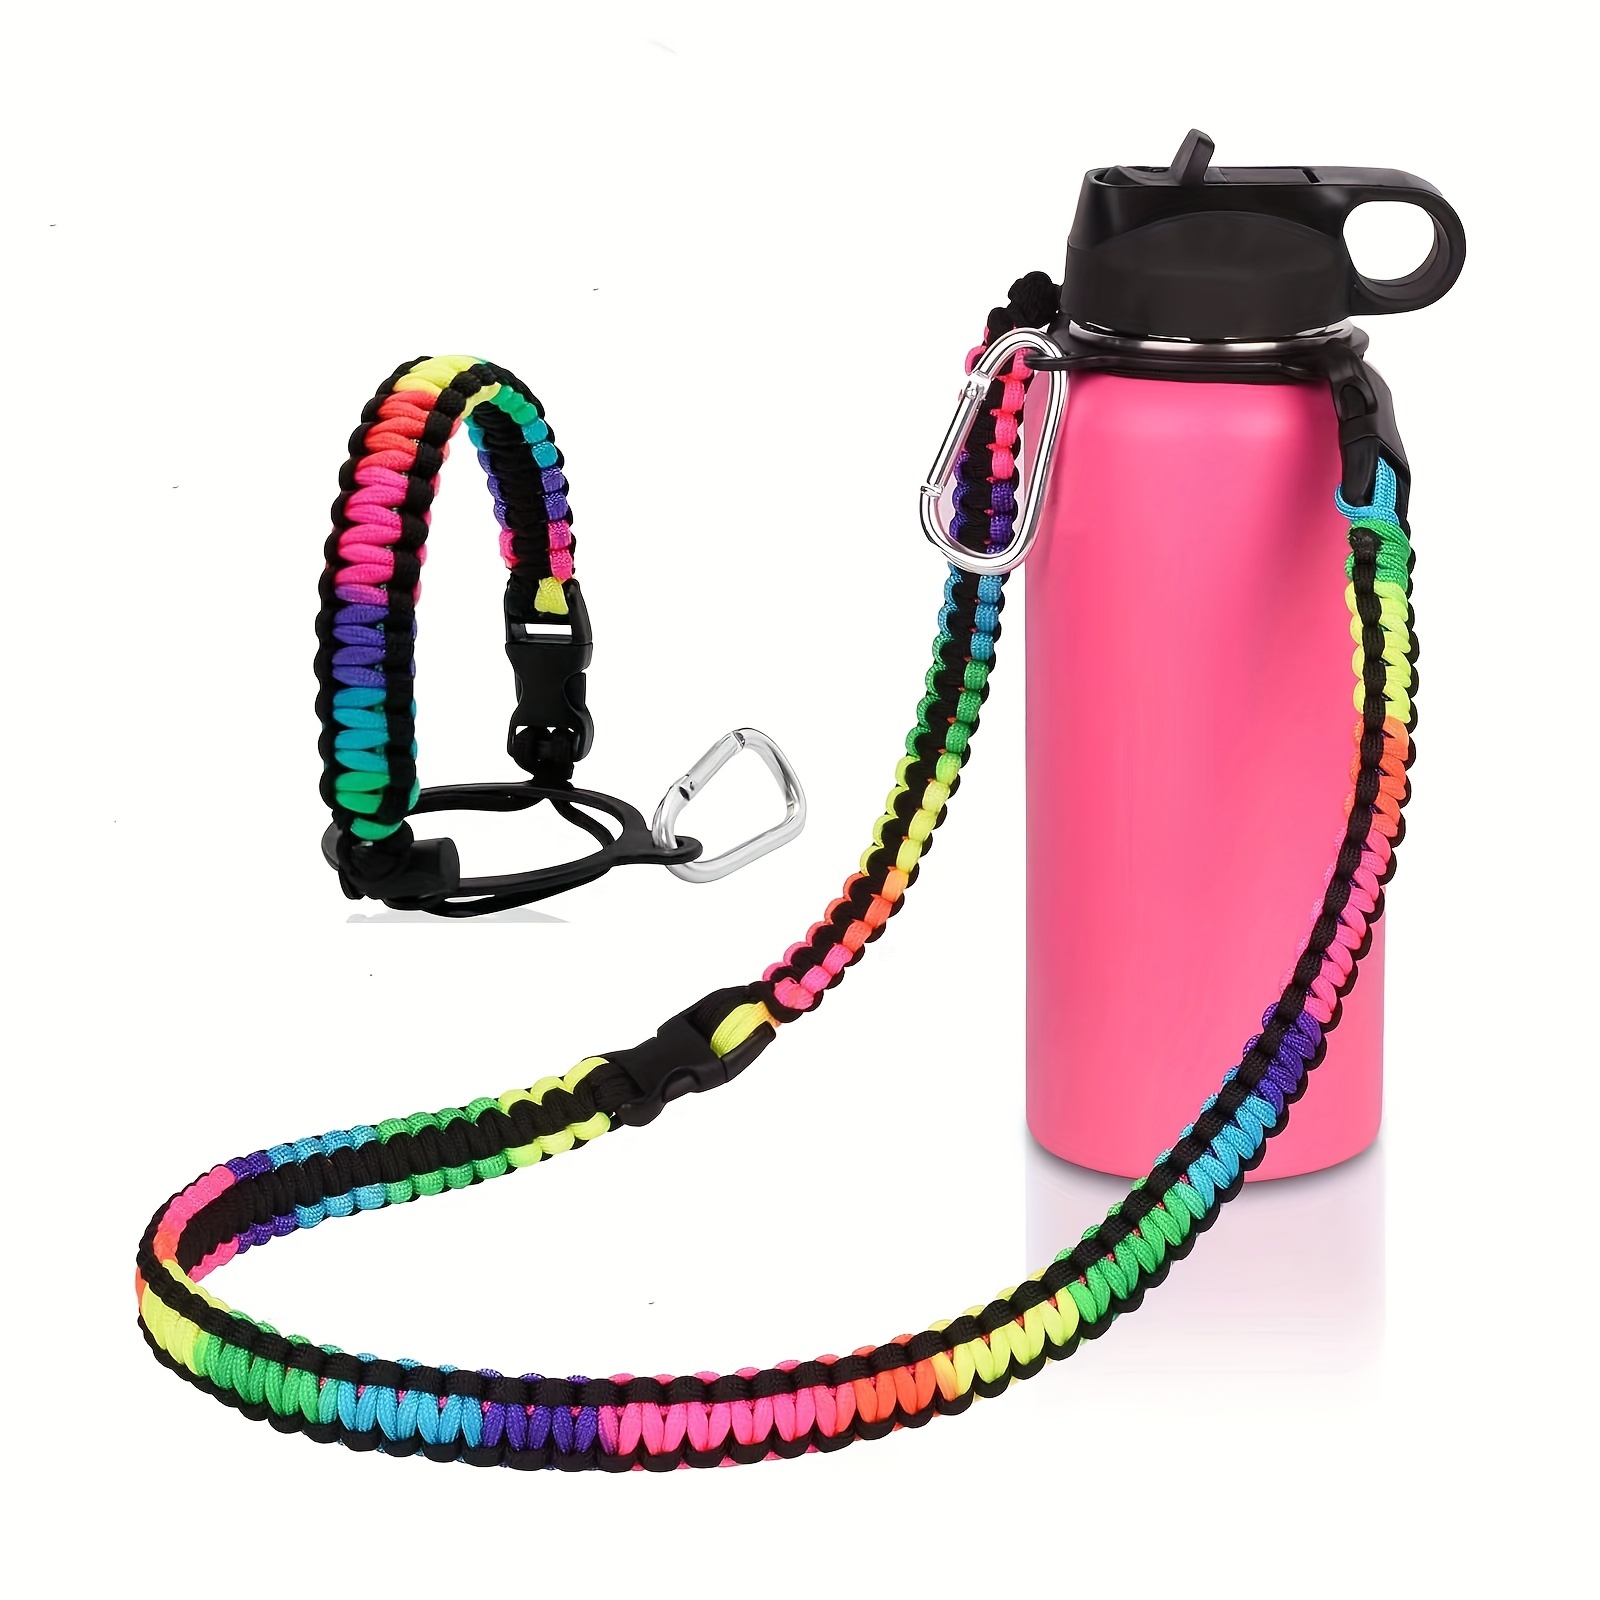 Iron Aflask Paracord Handle - Fits Wide Mouth Water Bottles